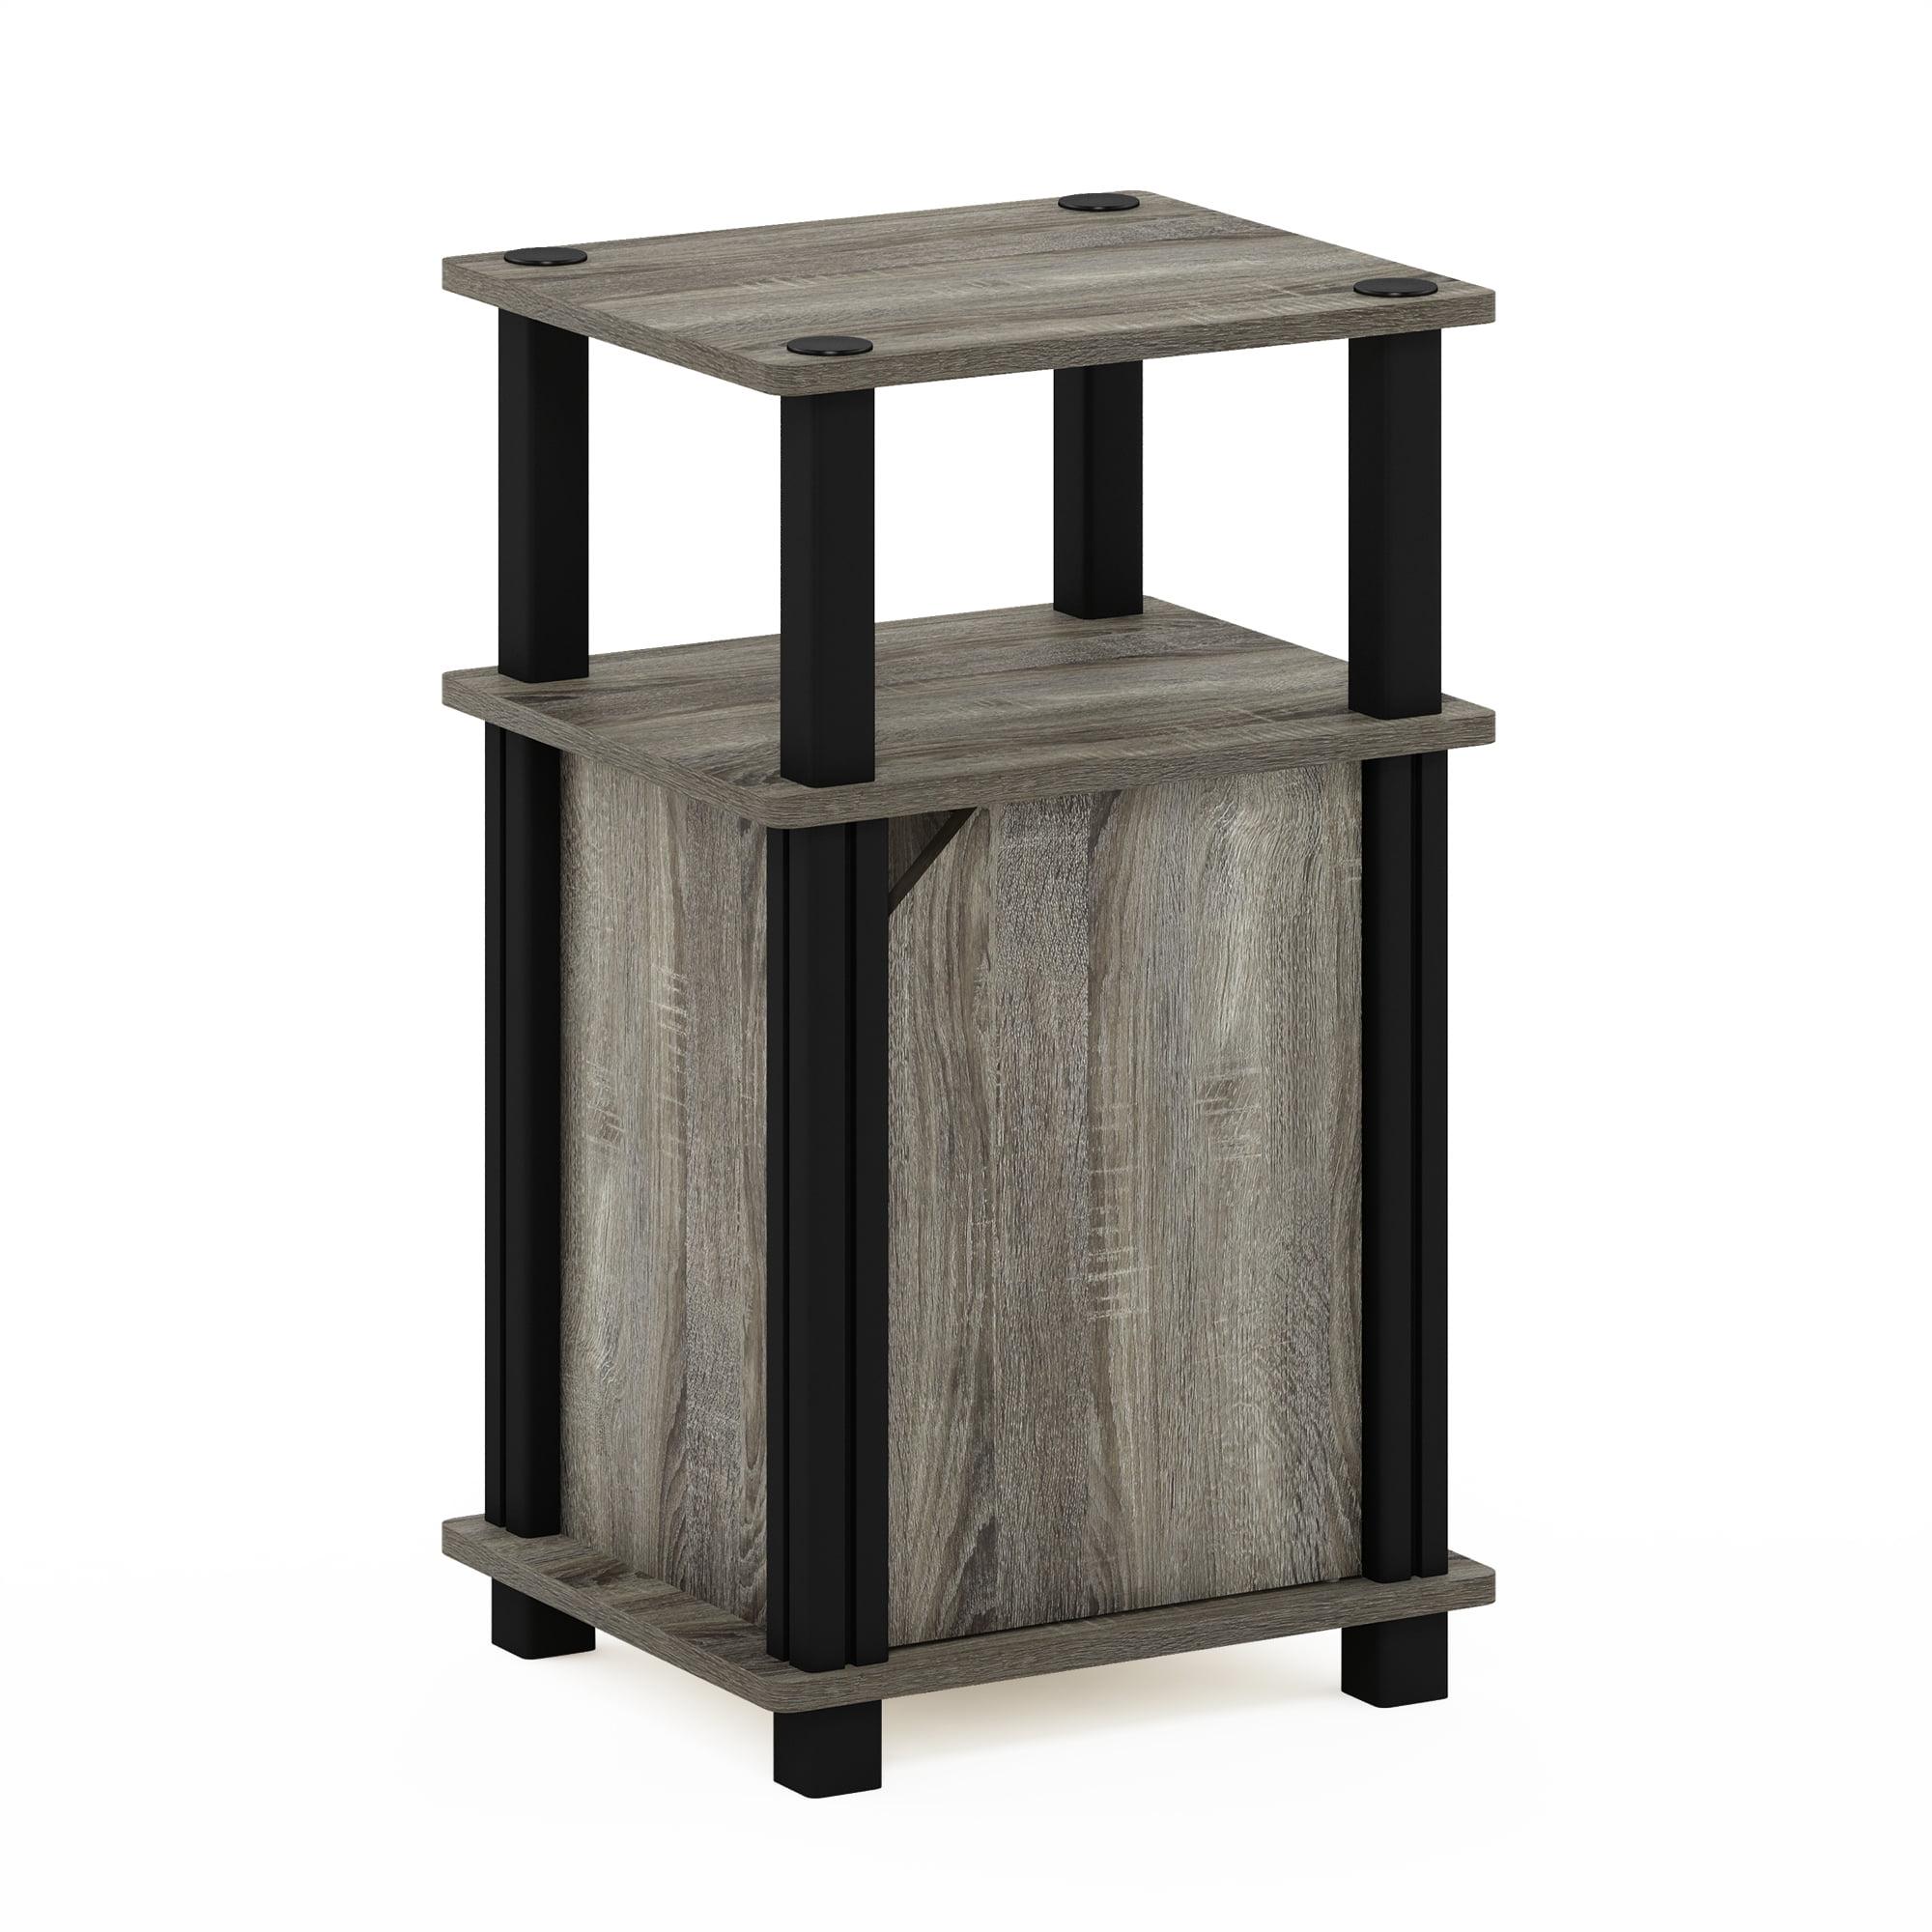 French Oak & Black Square End Table with Storage Shelf